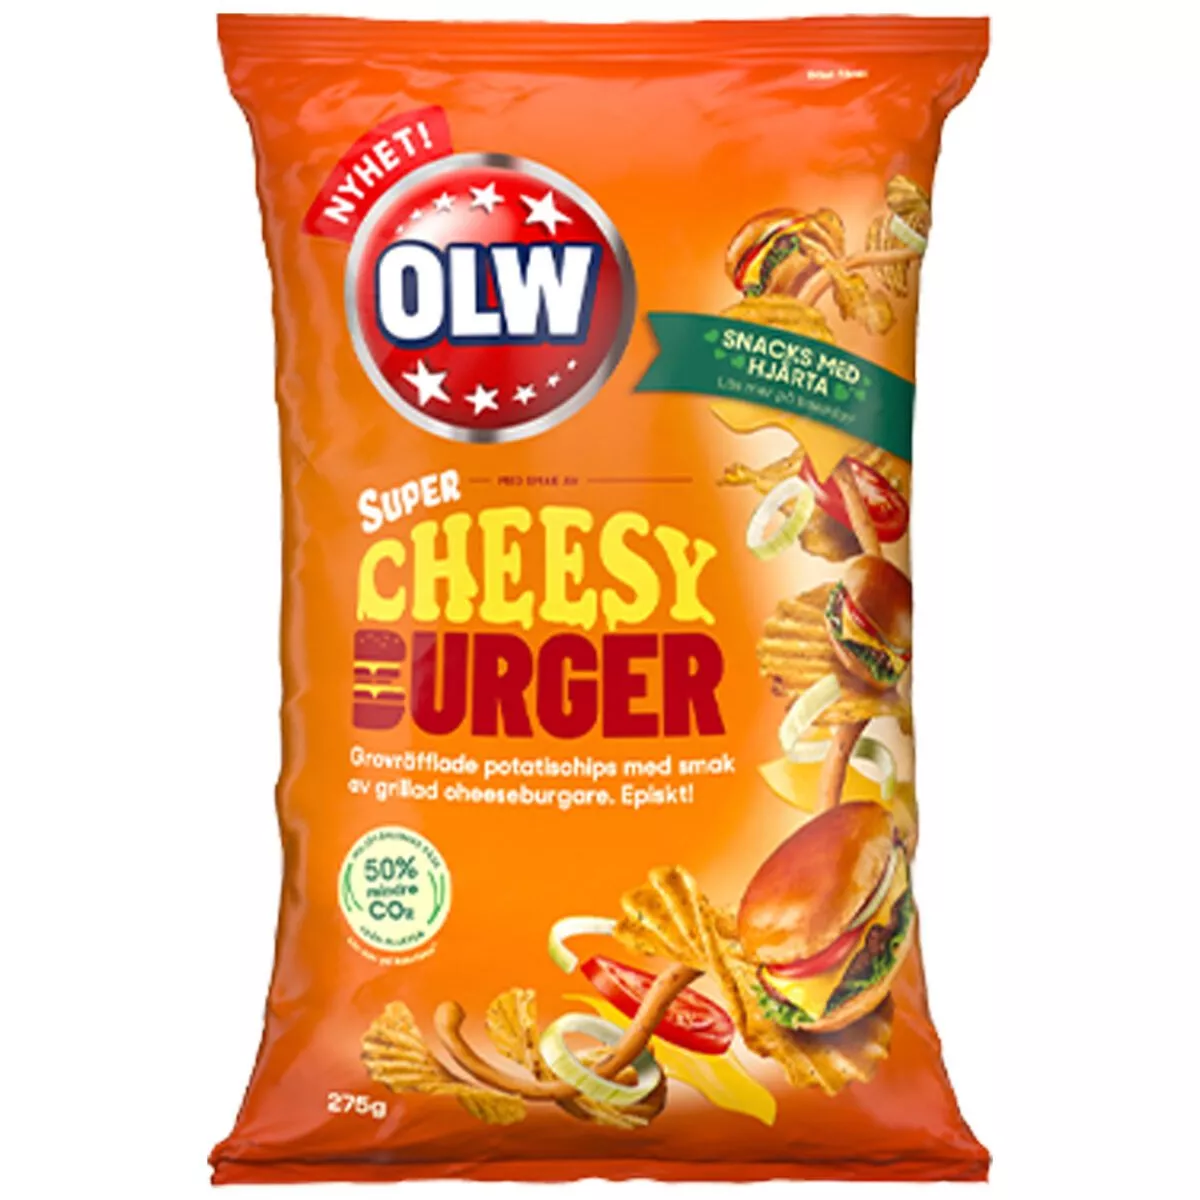 Olw Chips Super Cheesy Burger (175g) 1